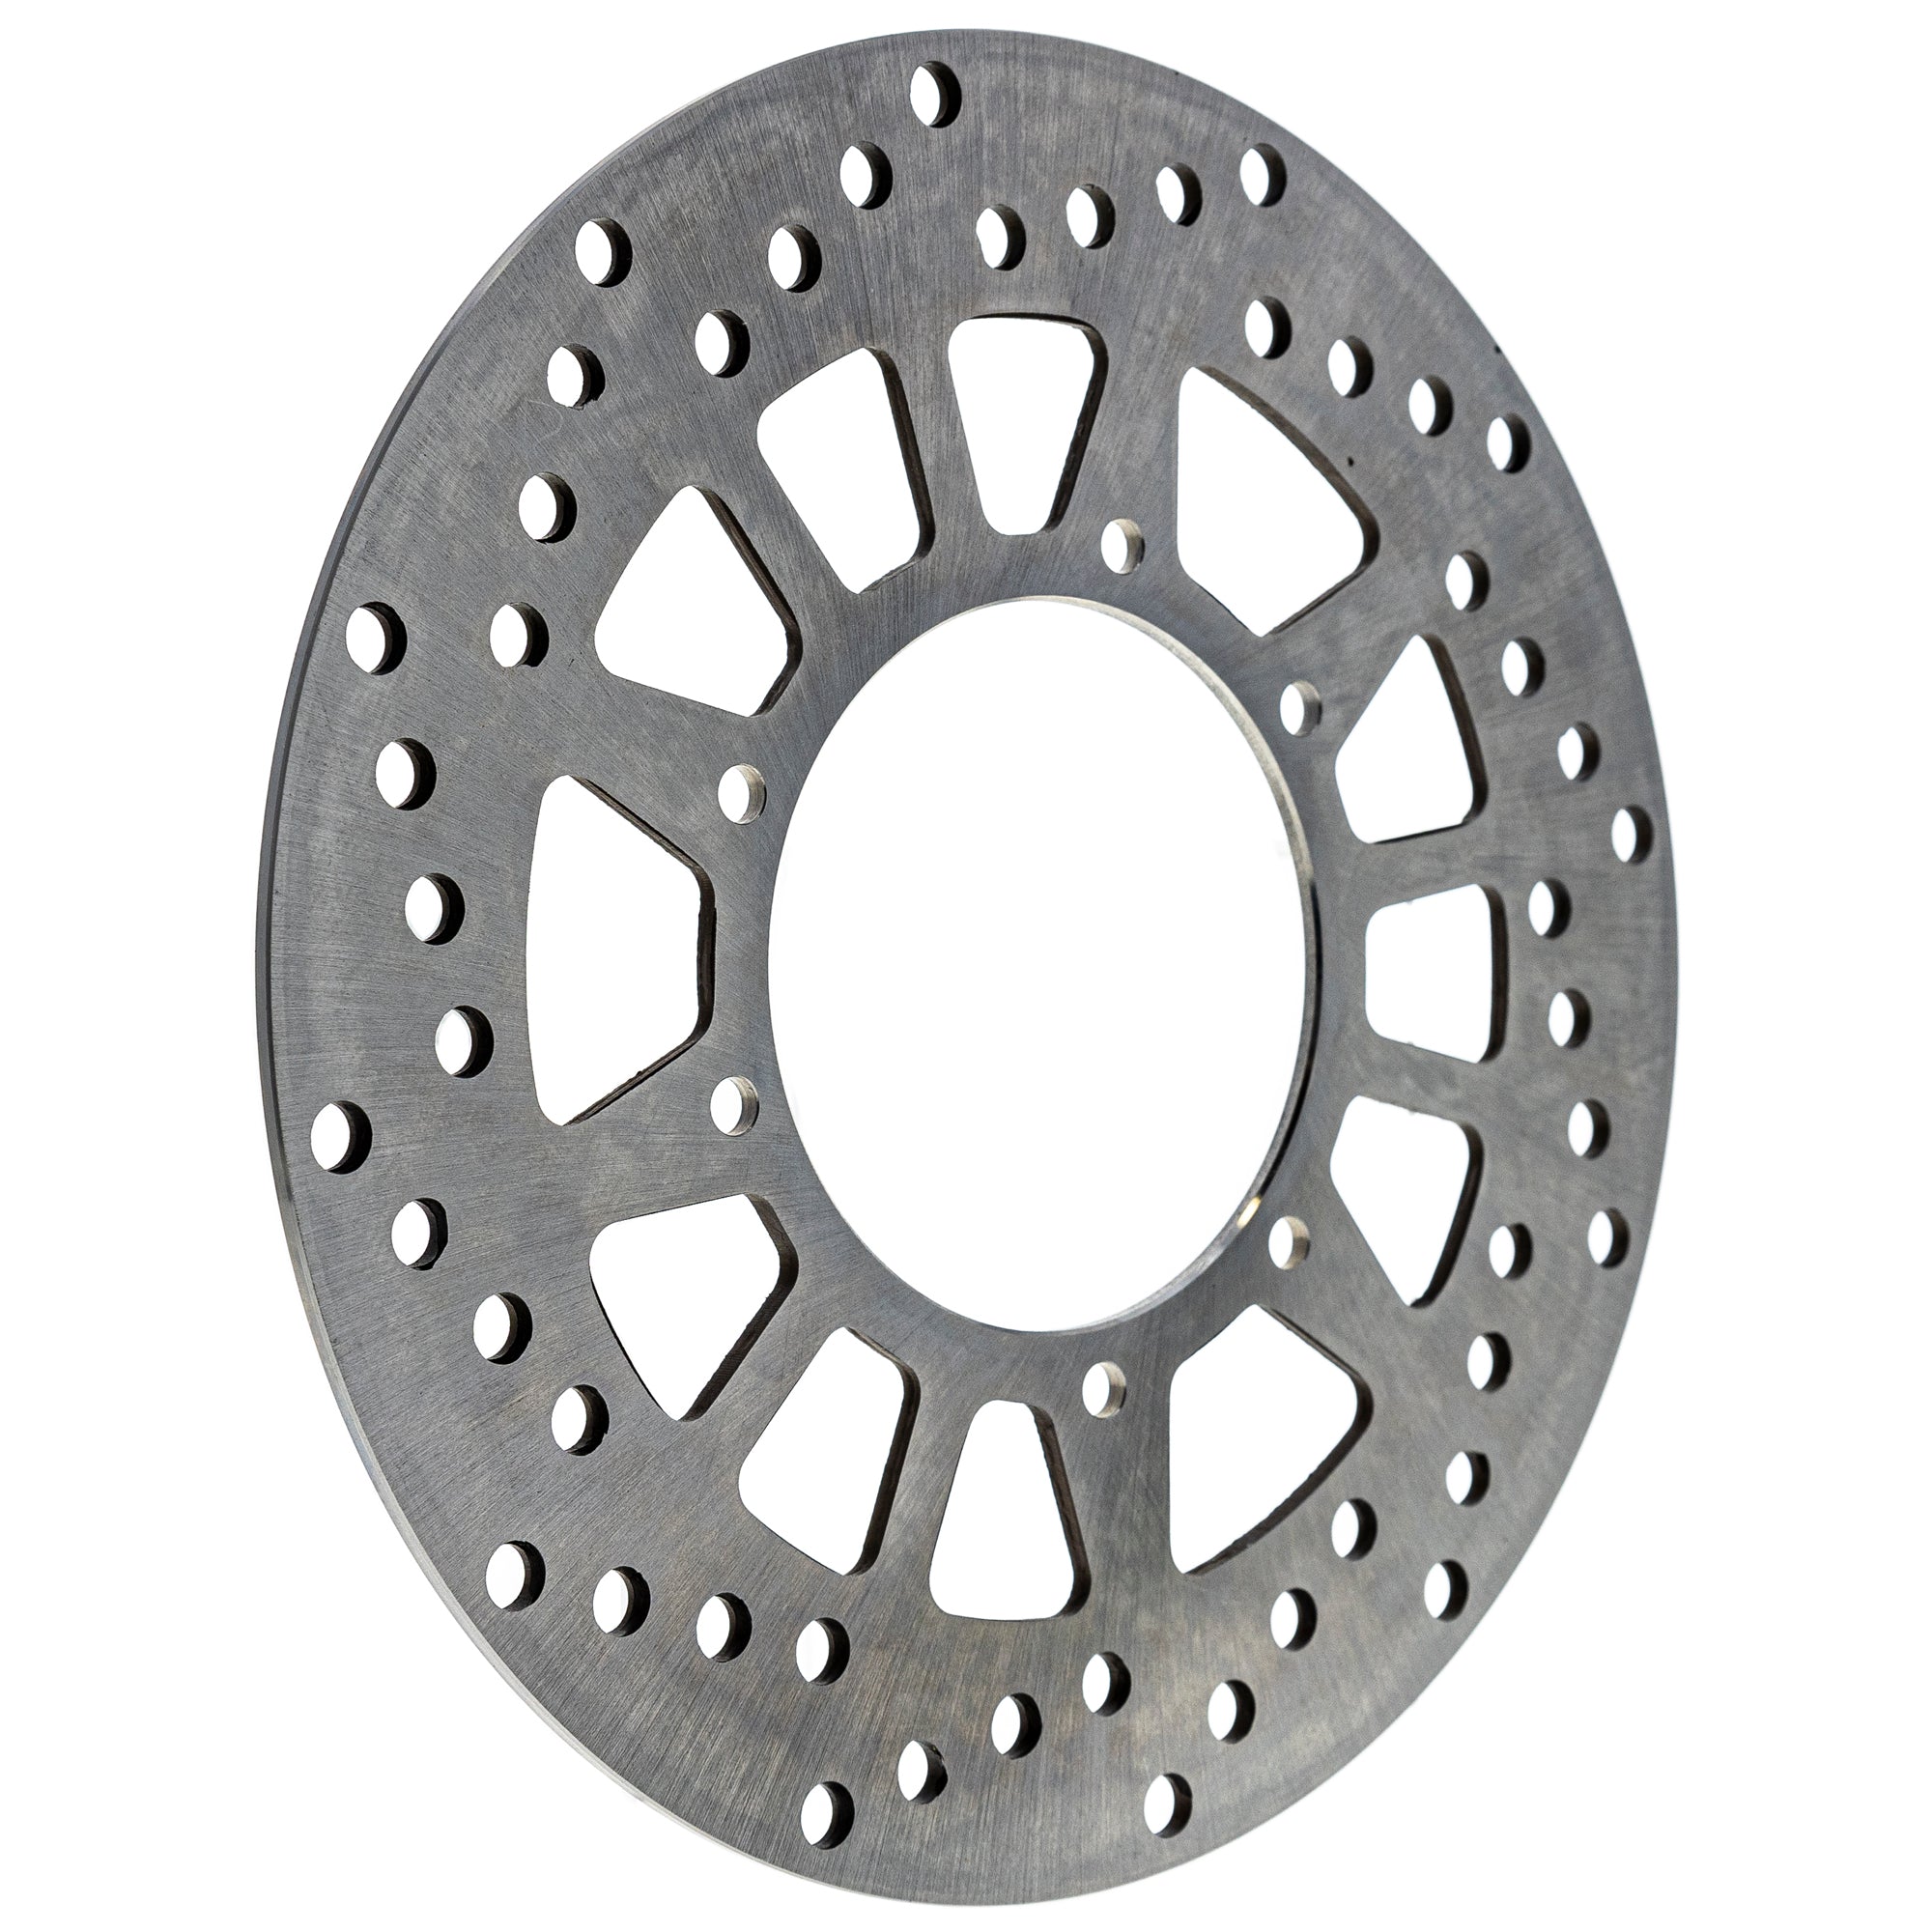 Front Brake Rotor for Yamaha YZ250 YZ125 XT225 TTR225 Motorcycle